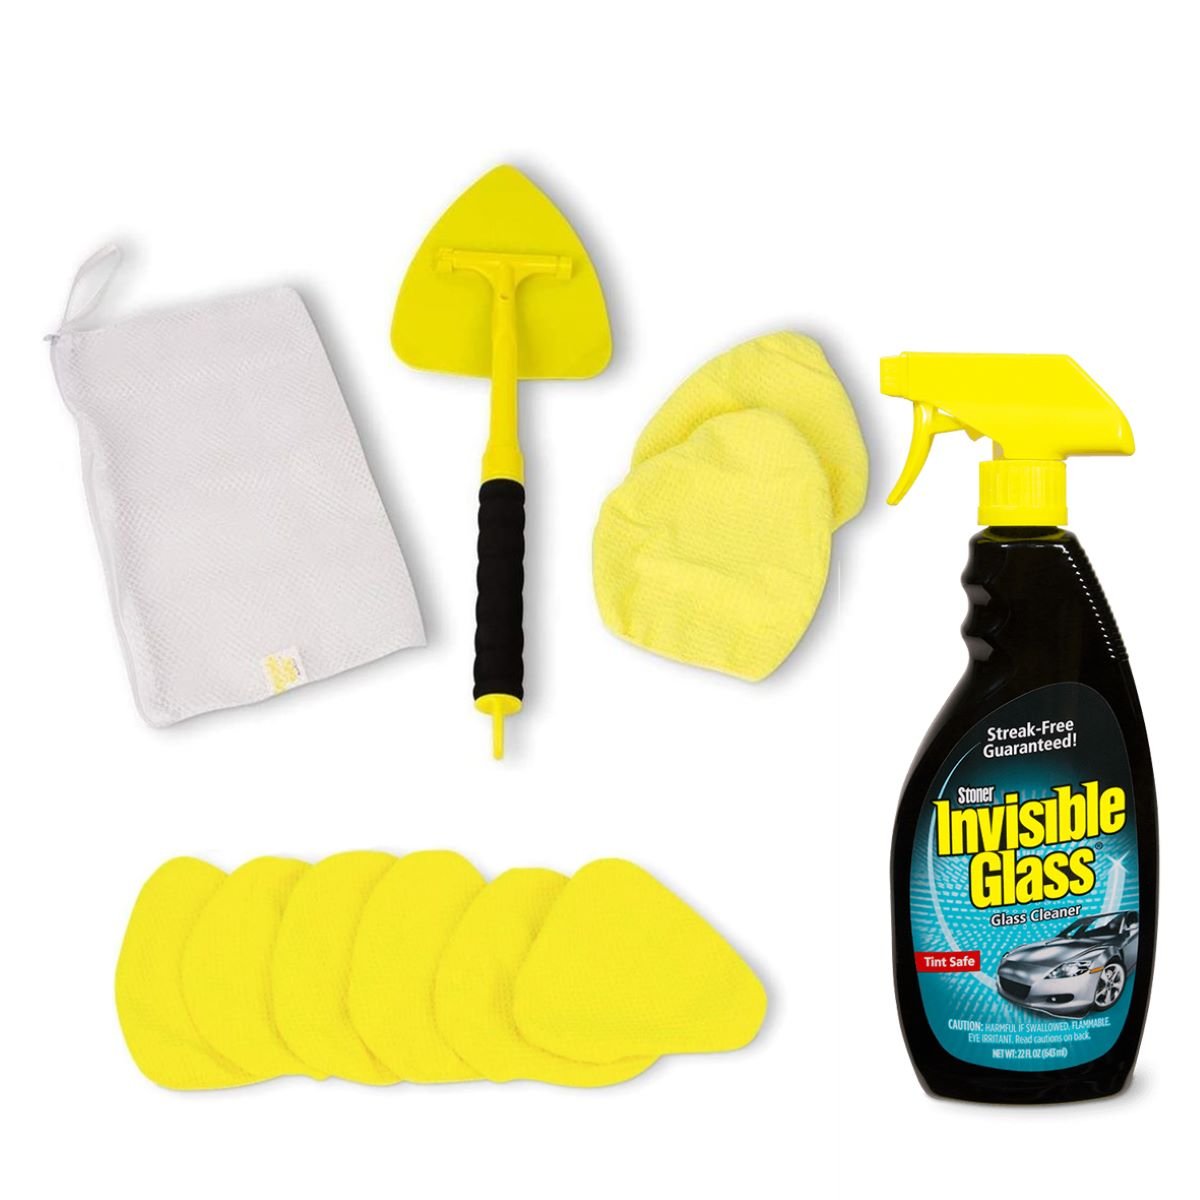 Invisible Glass Quick Change Window Cleaning Kit